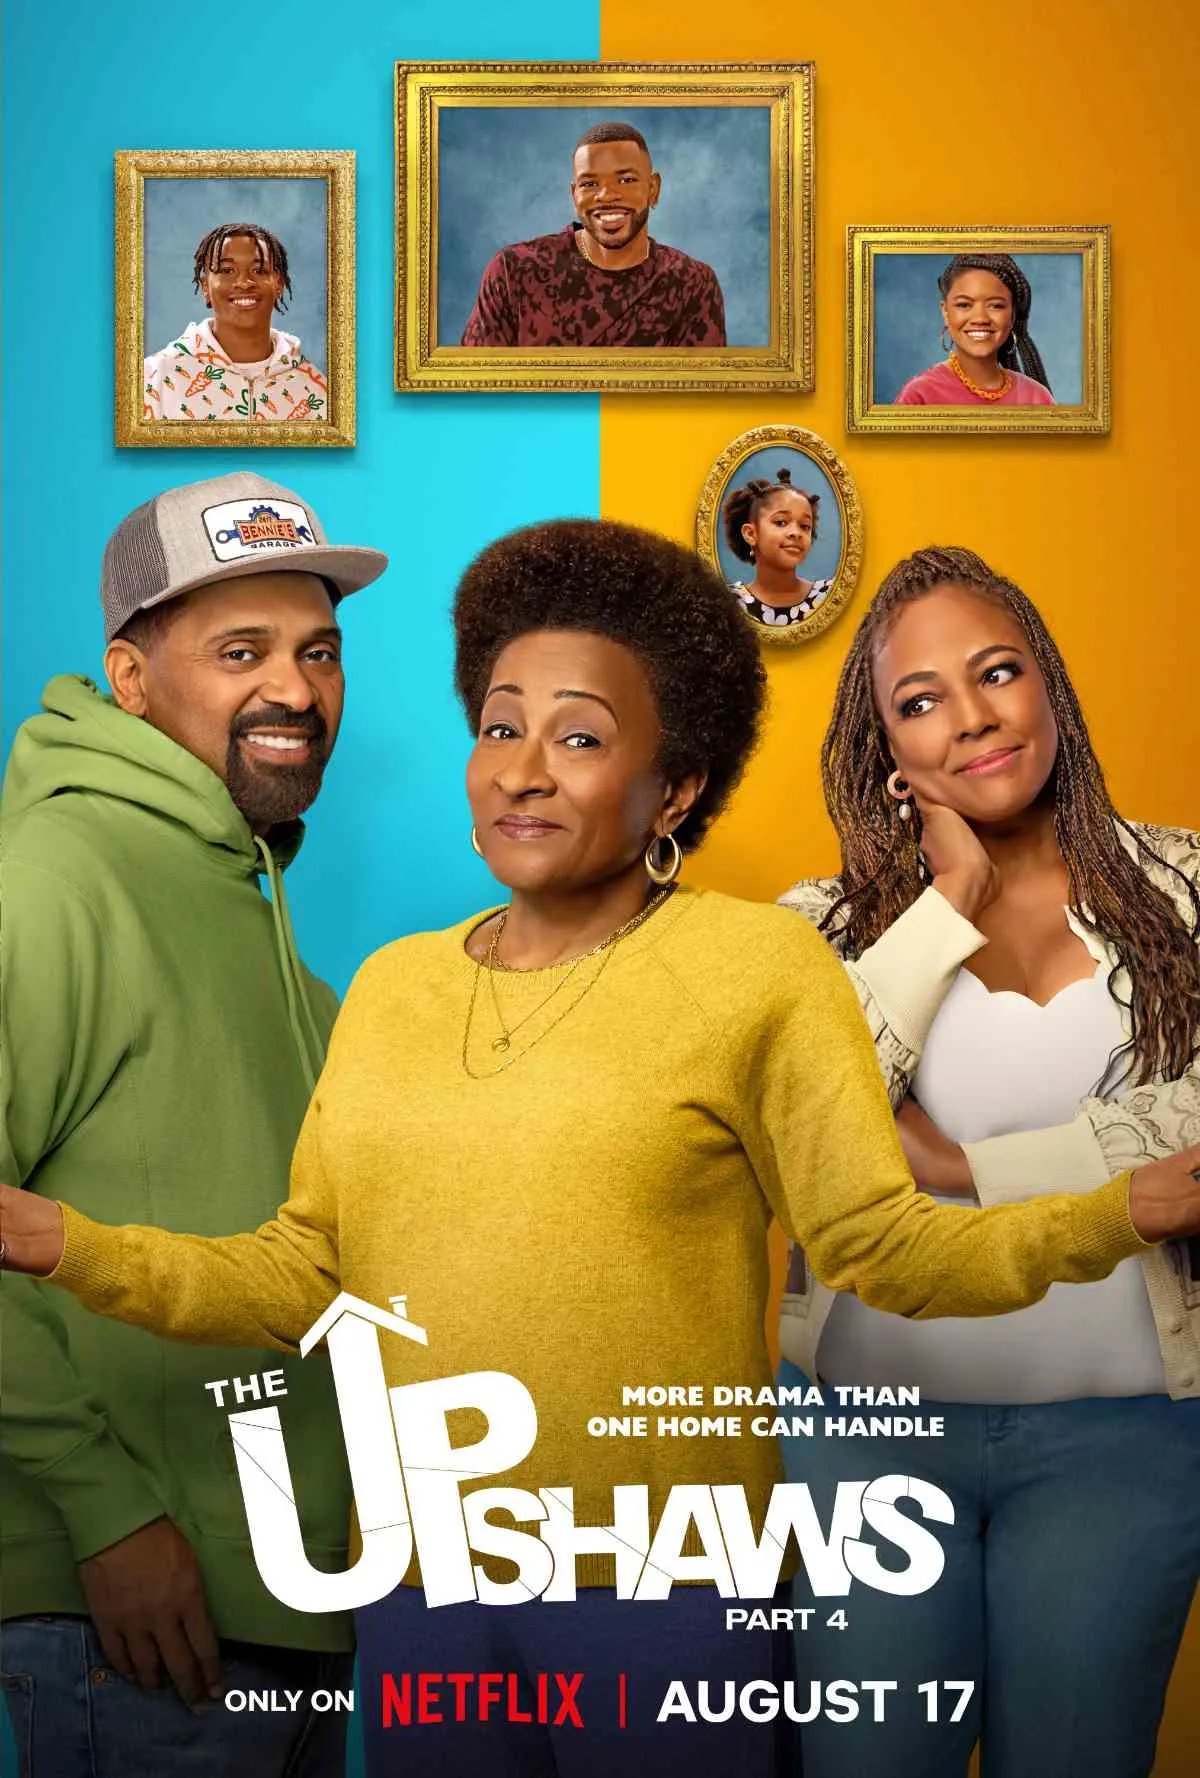 The Upshaws Part 4 Trailer and Key Art Debut